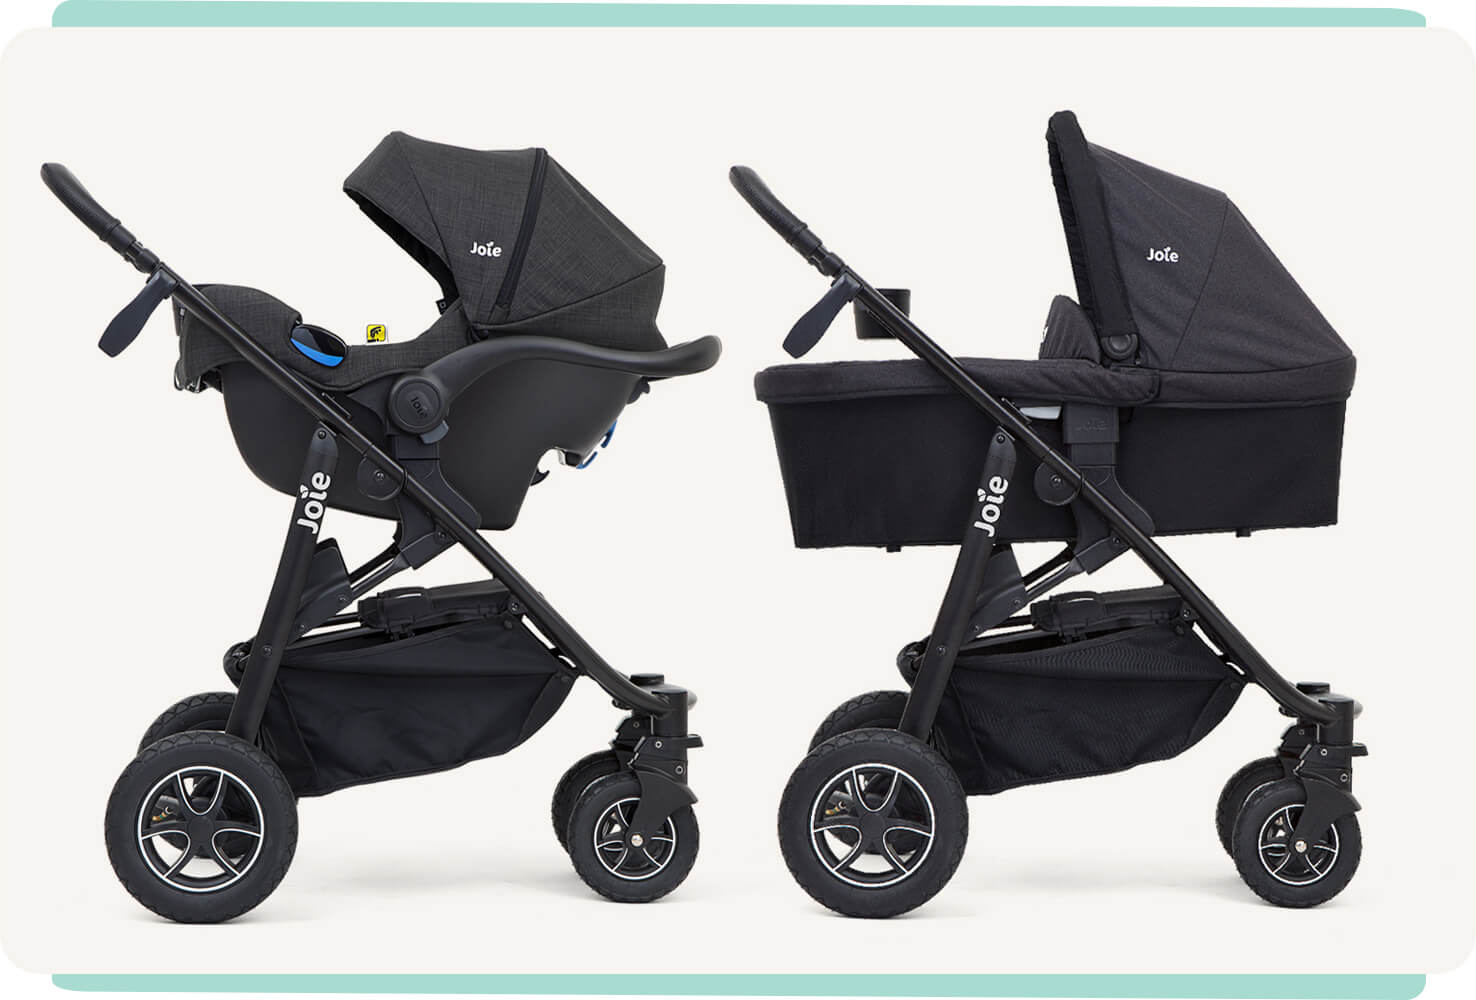 Joie mytrax stoller in black with infant carrier facing left next to mytrax stroller in black with a carry cot facing left. 